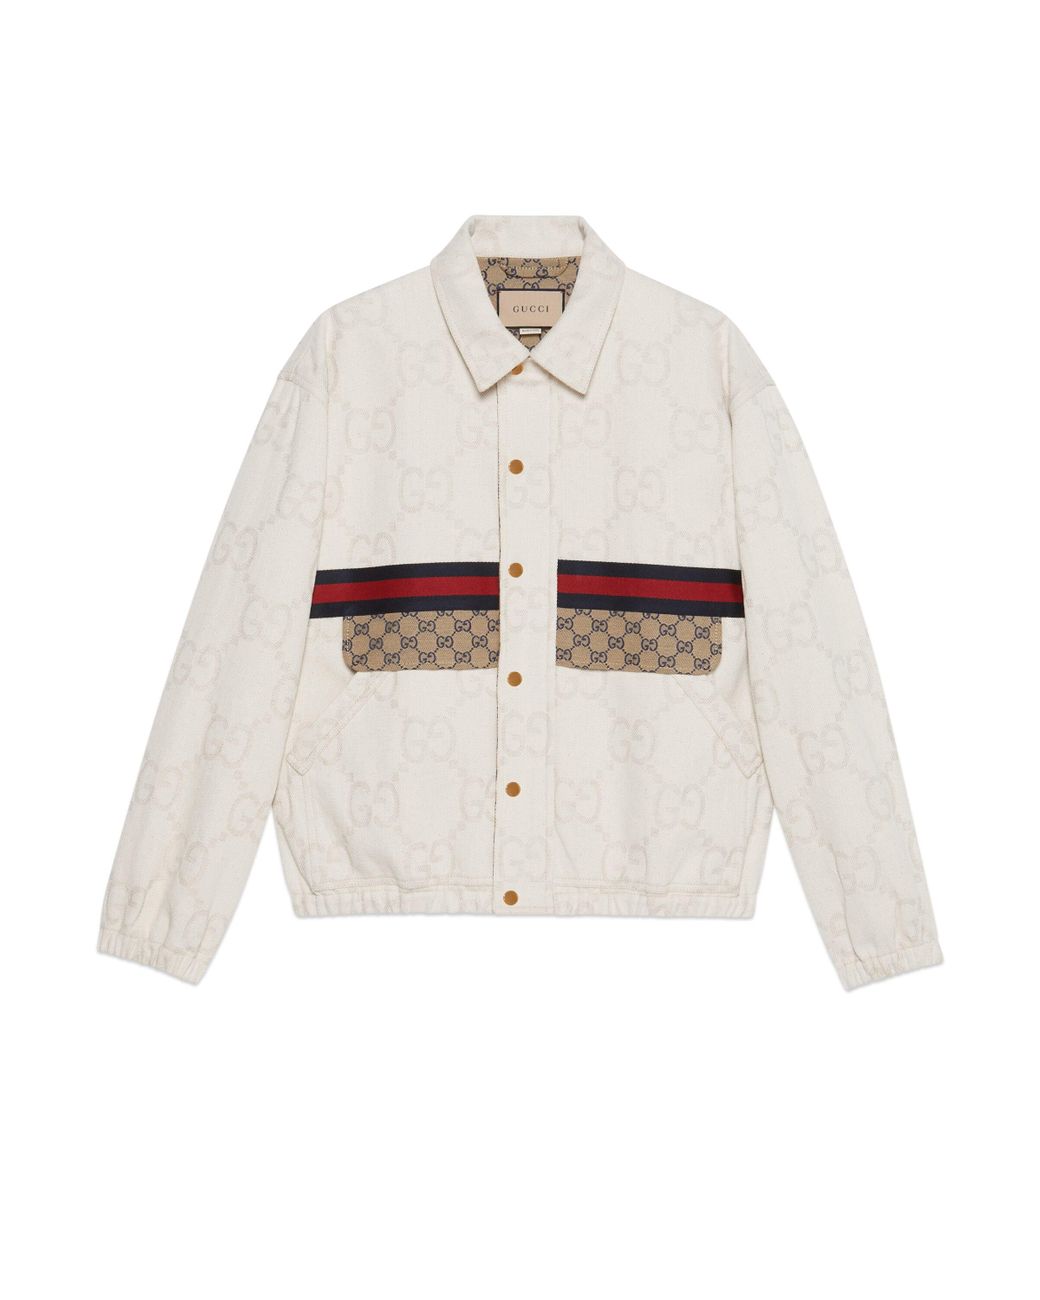 Gucci Maxi GG Denim Jacket With Web in White for Men